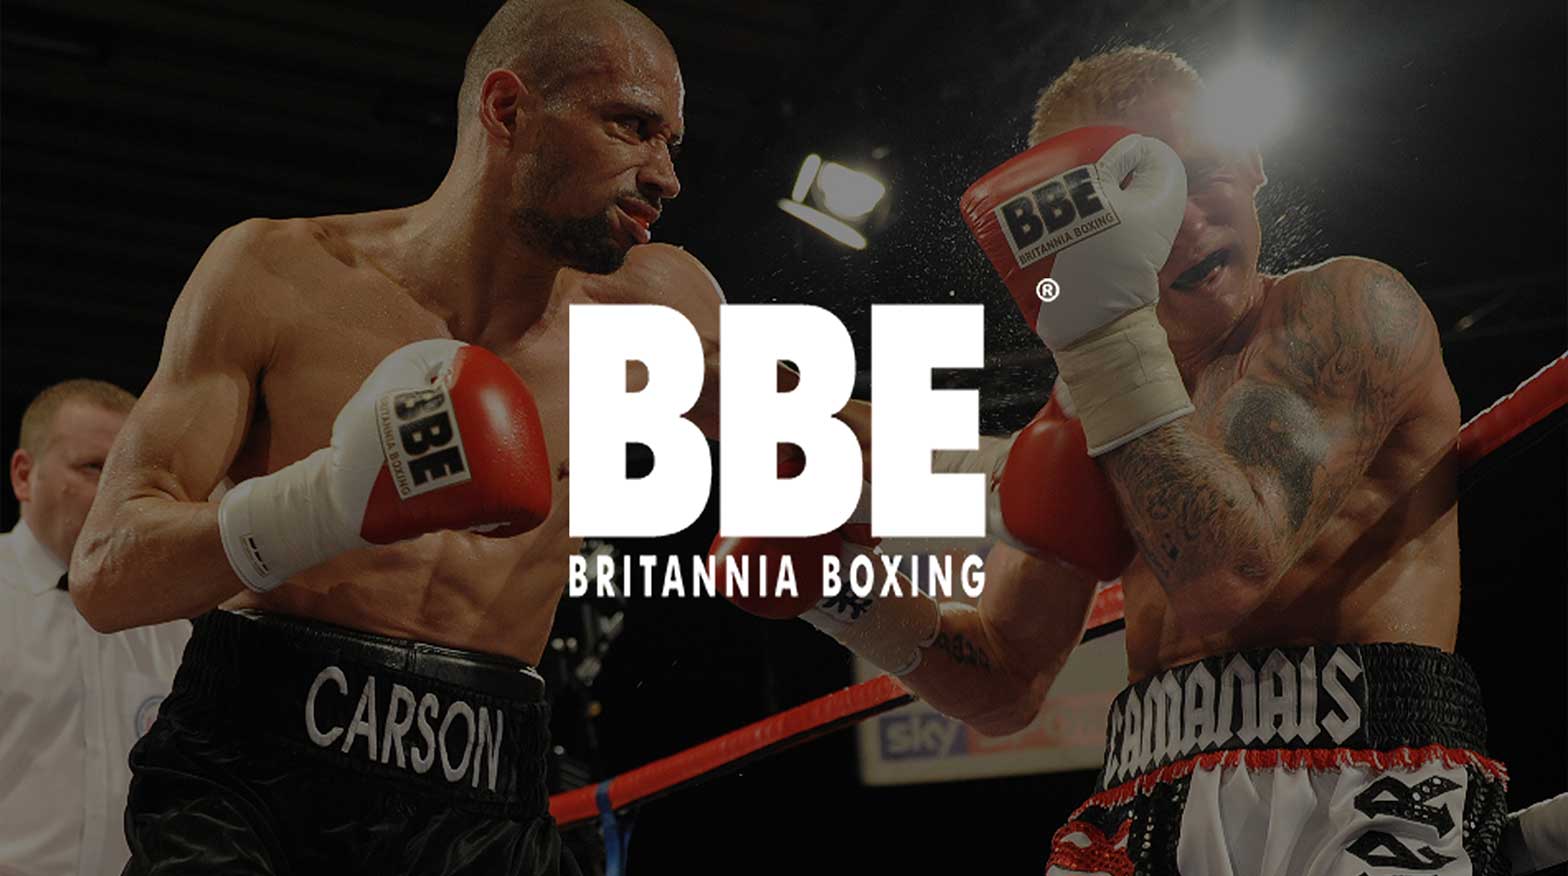 BBE Boxing